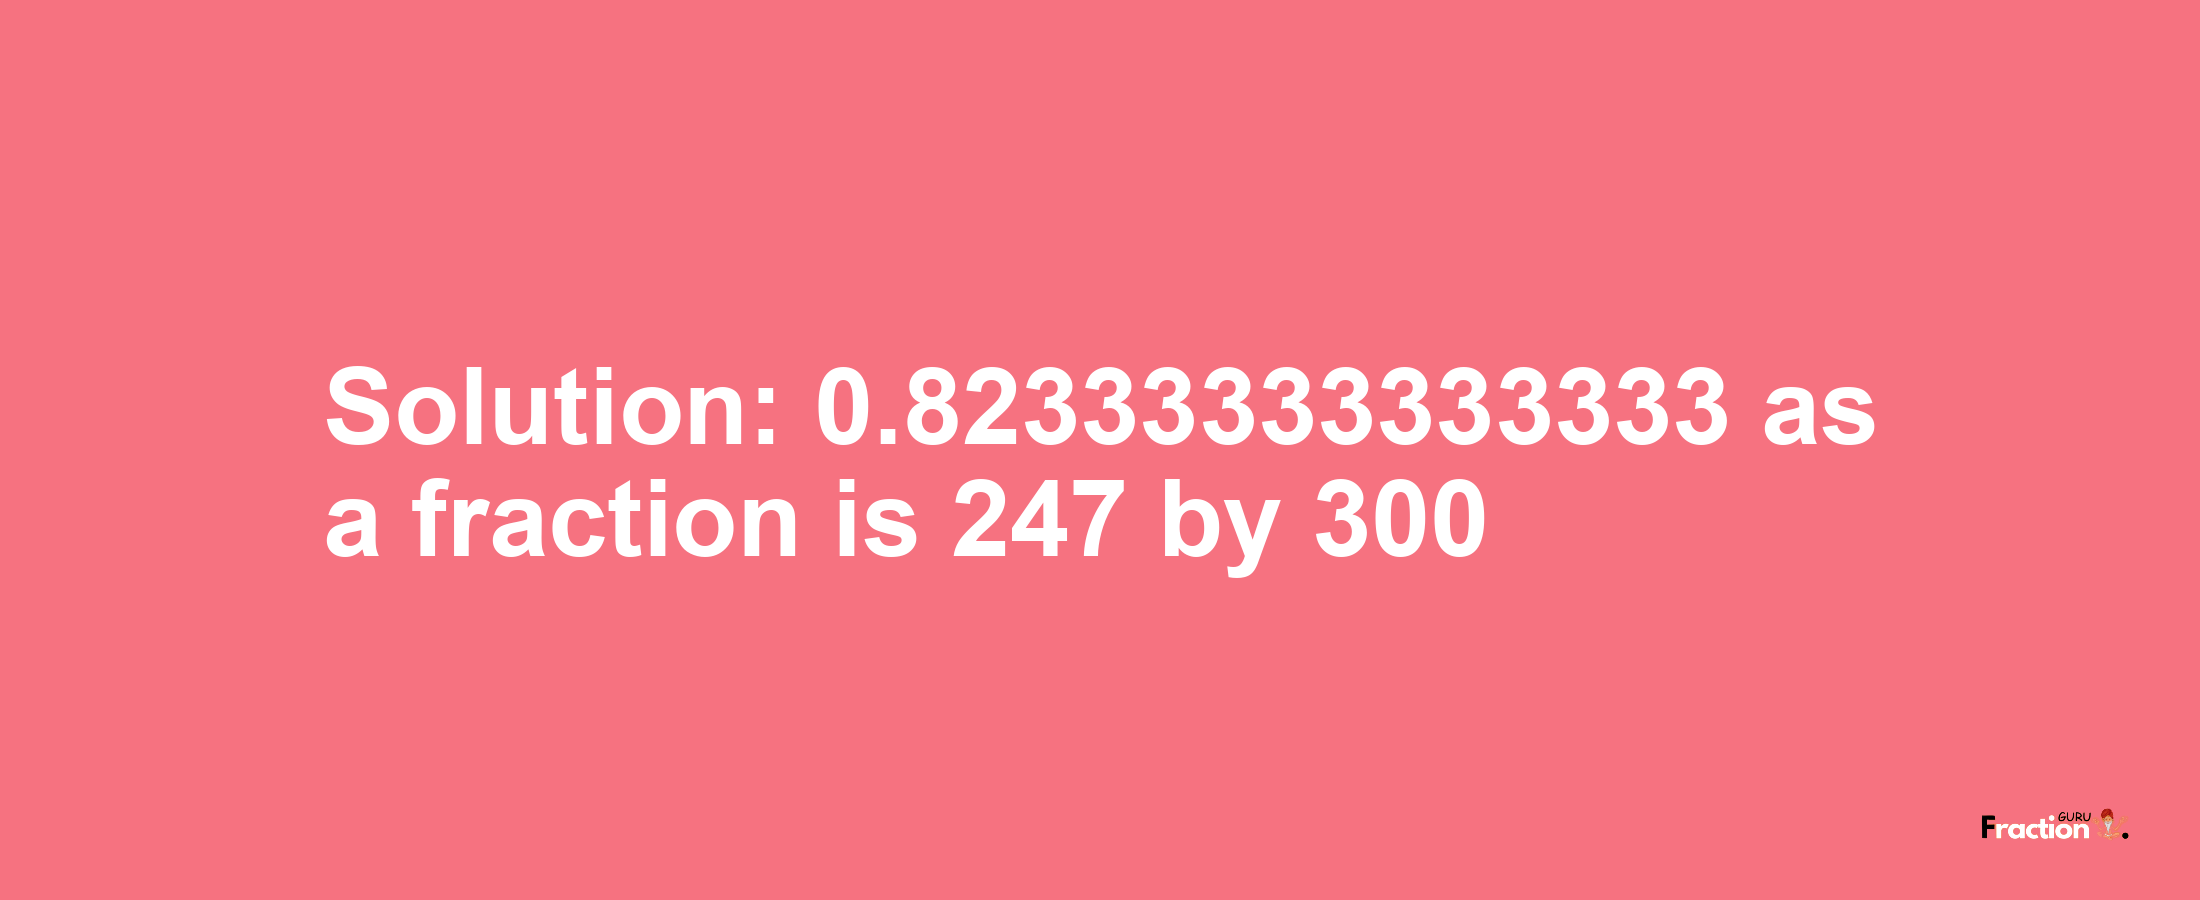 Solution:0.82333333333333 as a fraction is 247/300